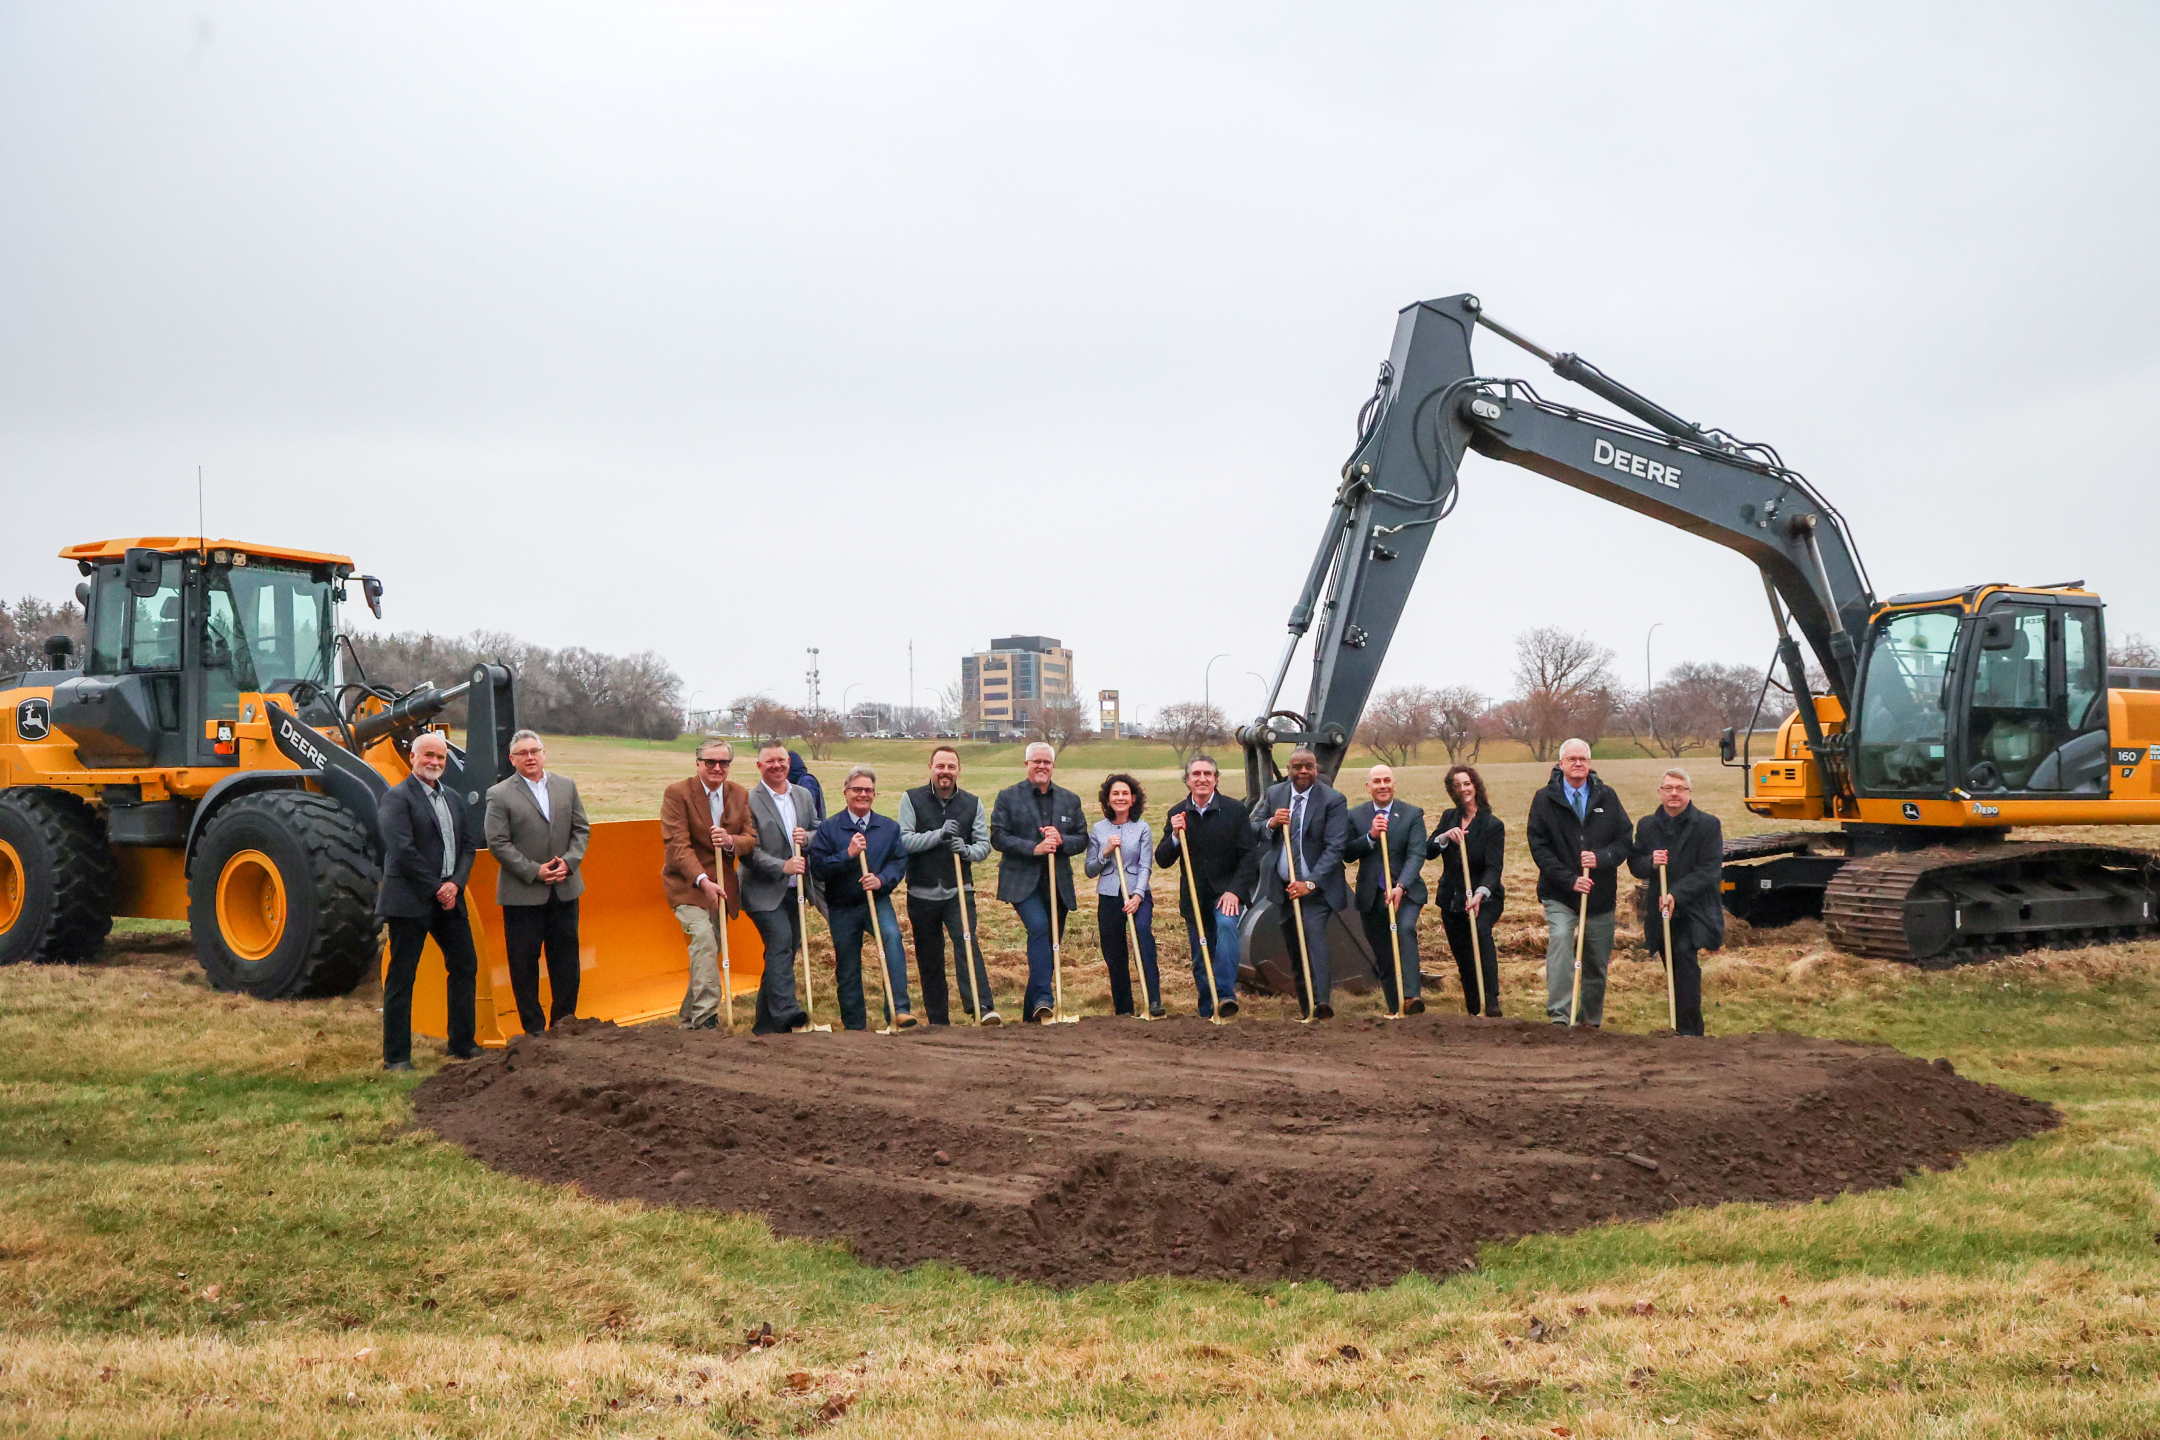 A group of government officials stand ready with their shovels in the ground at the state lab construction site. Two large digging vehicles are behind them.